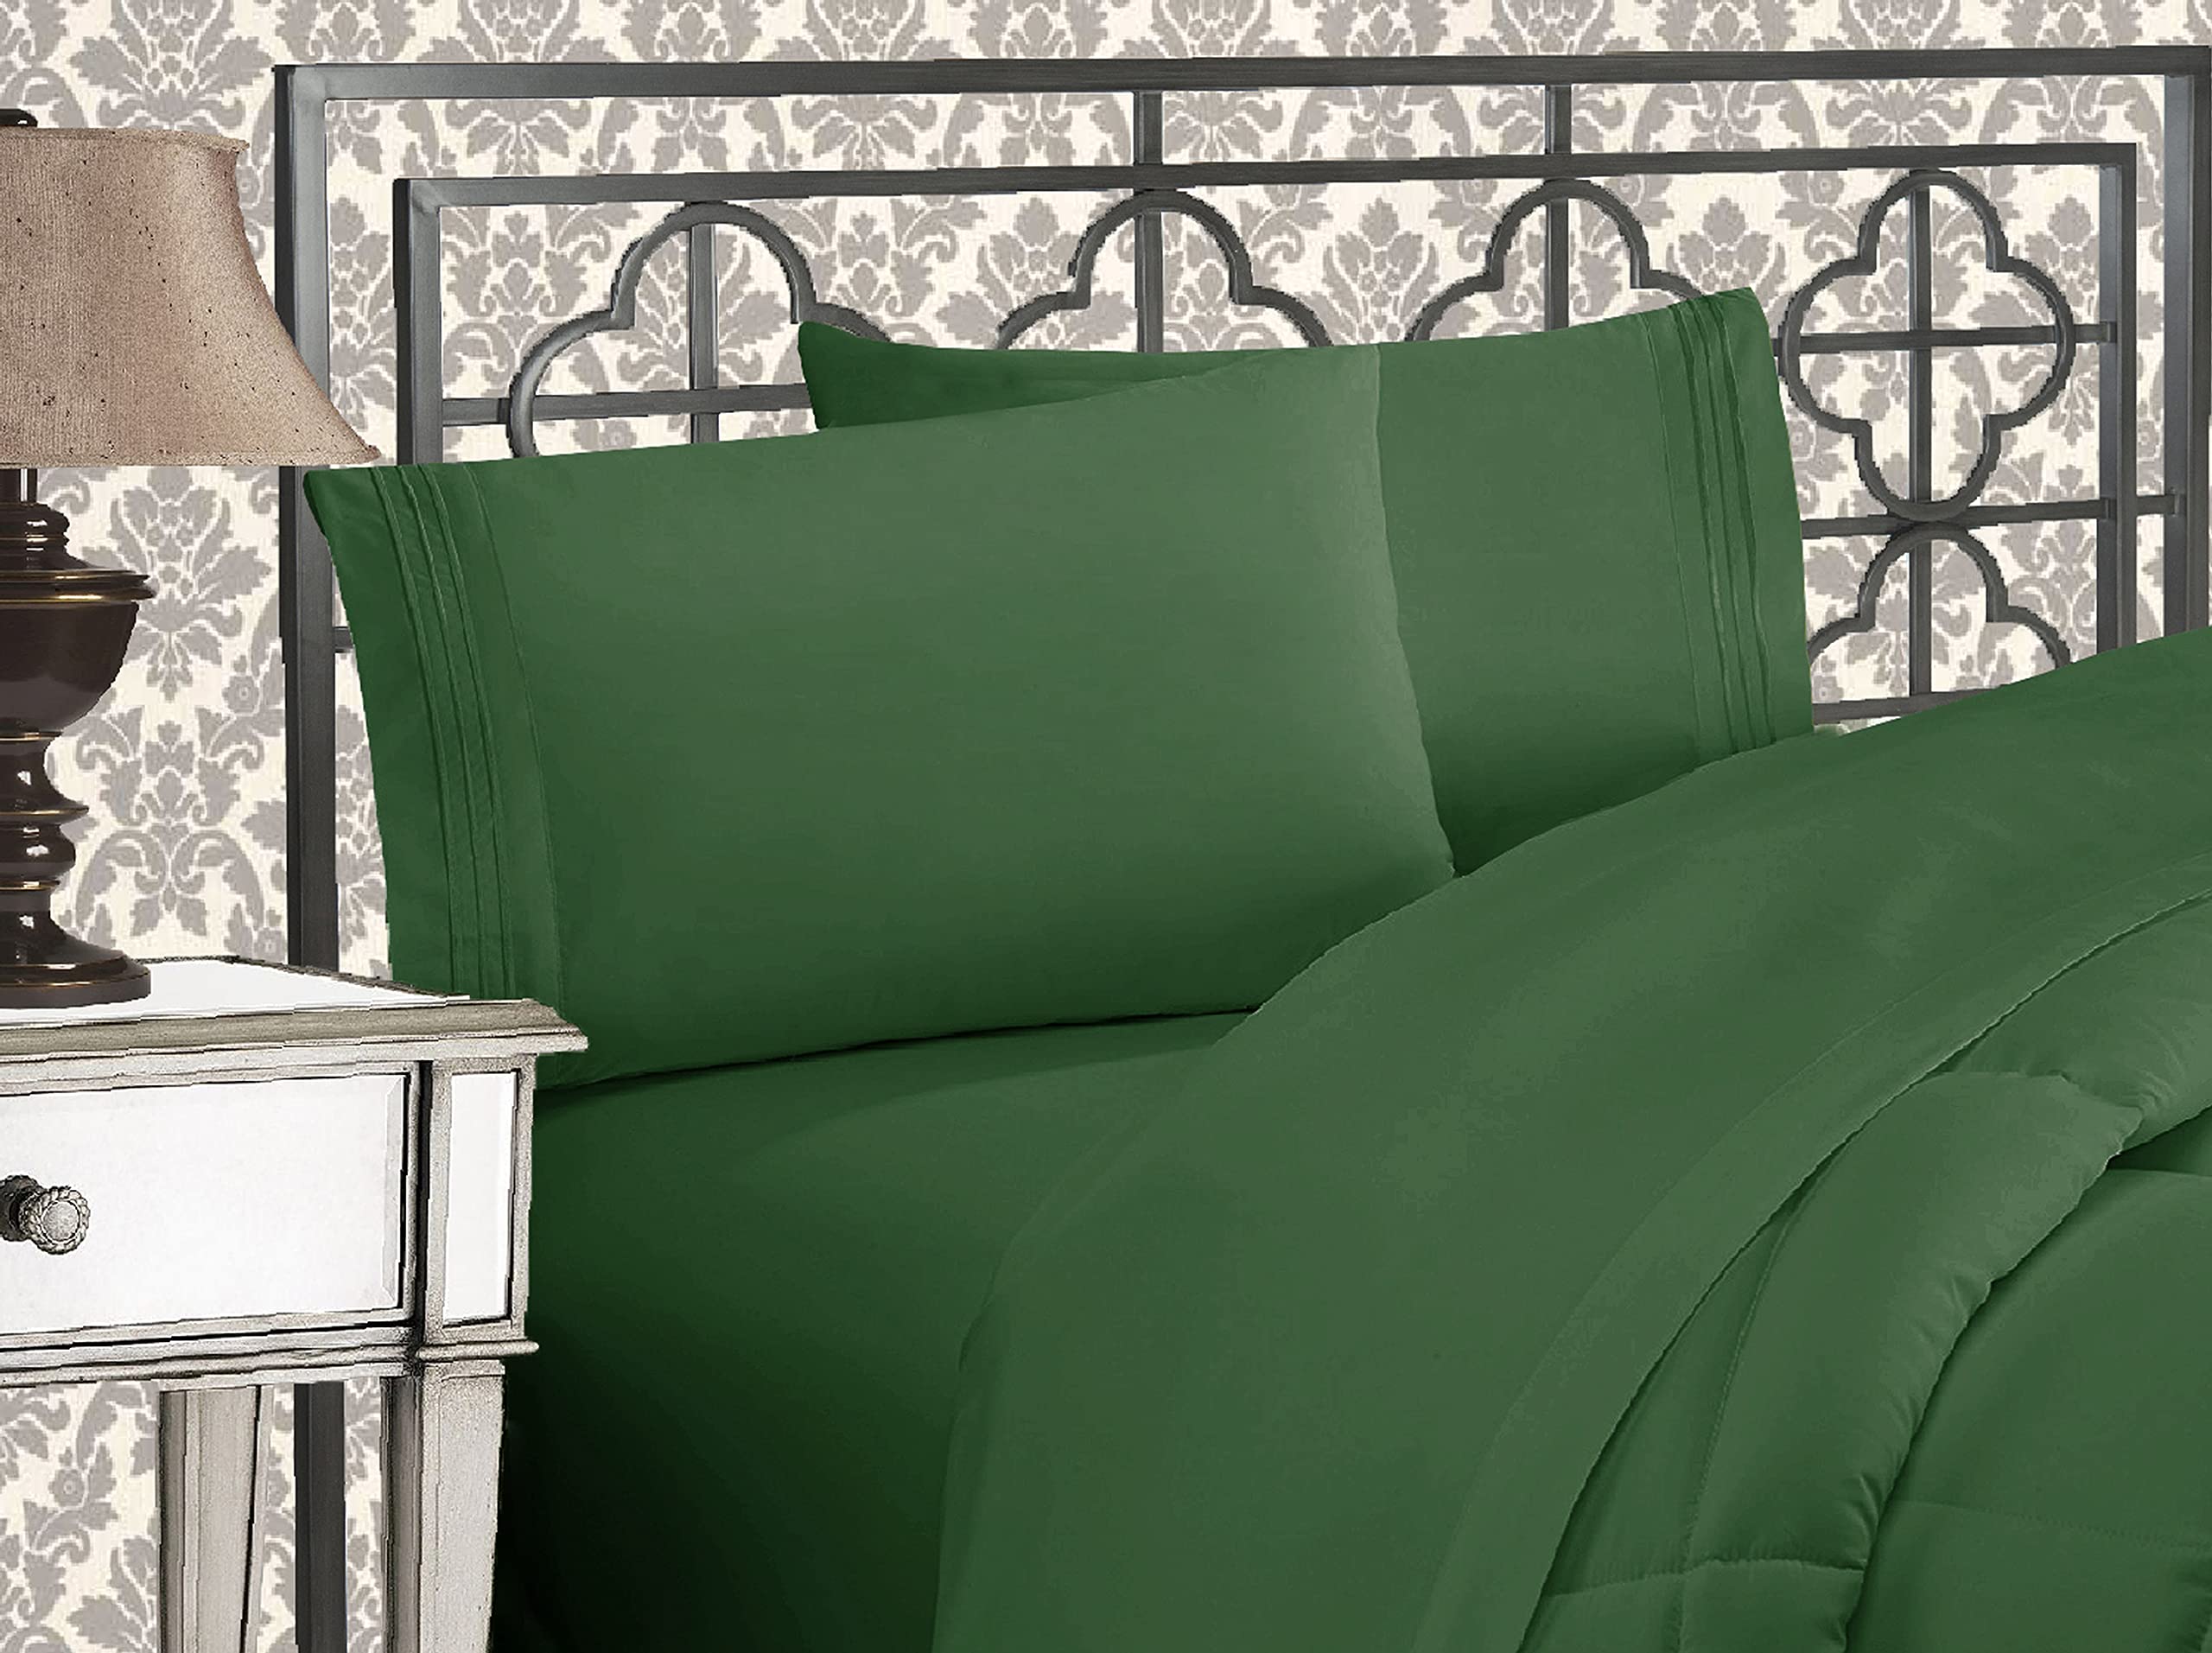 Elegant Comfort Luxurious 1500 Thread Count Egyptian Quality Three Line Embroidered Softest Premium Hotel Quality 4-Piece Bed Sheet Set, Wrinkle and Fade Resistant, Full, Hunter Green